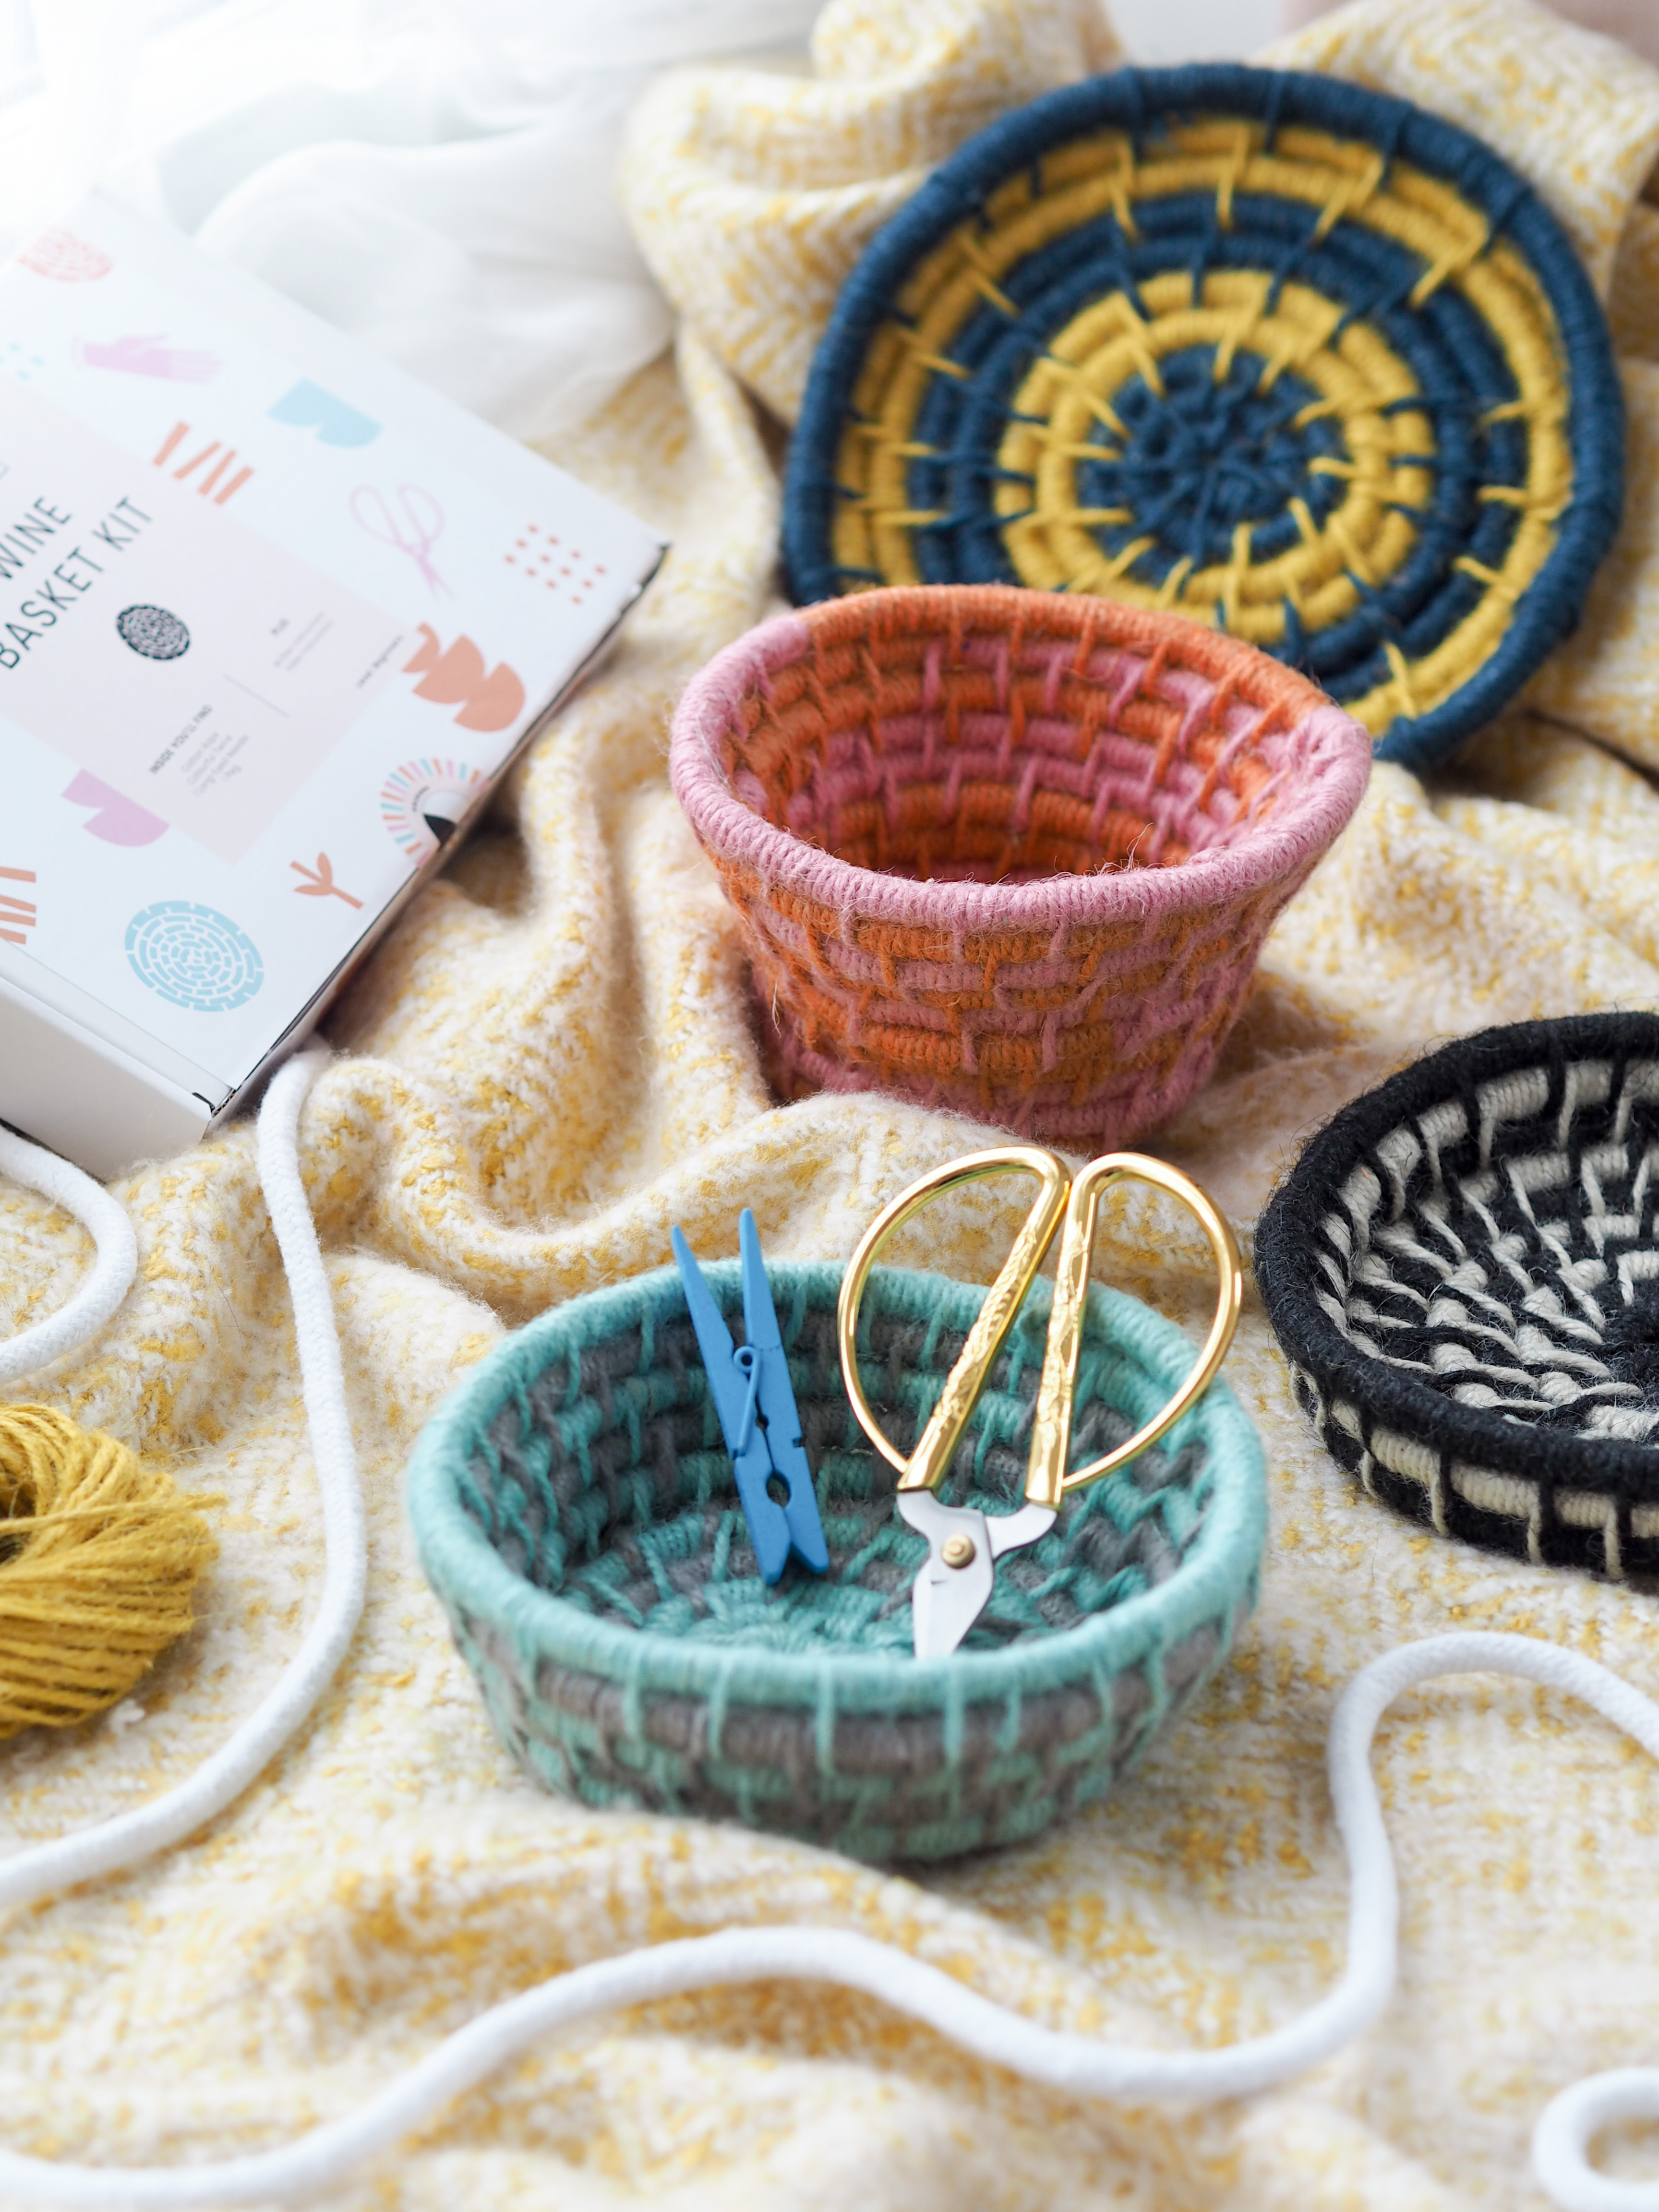 Beginners guide to basket weaving - Gathered